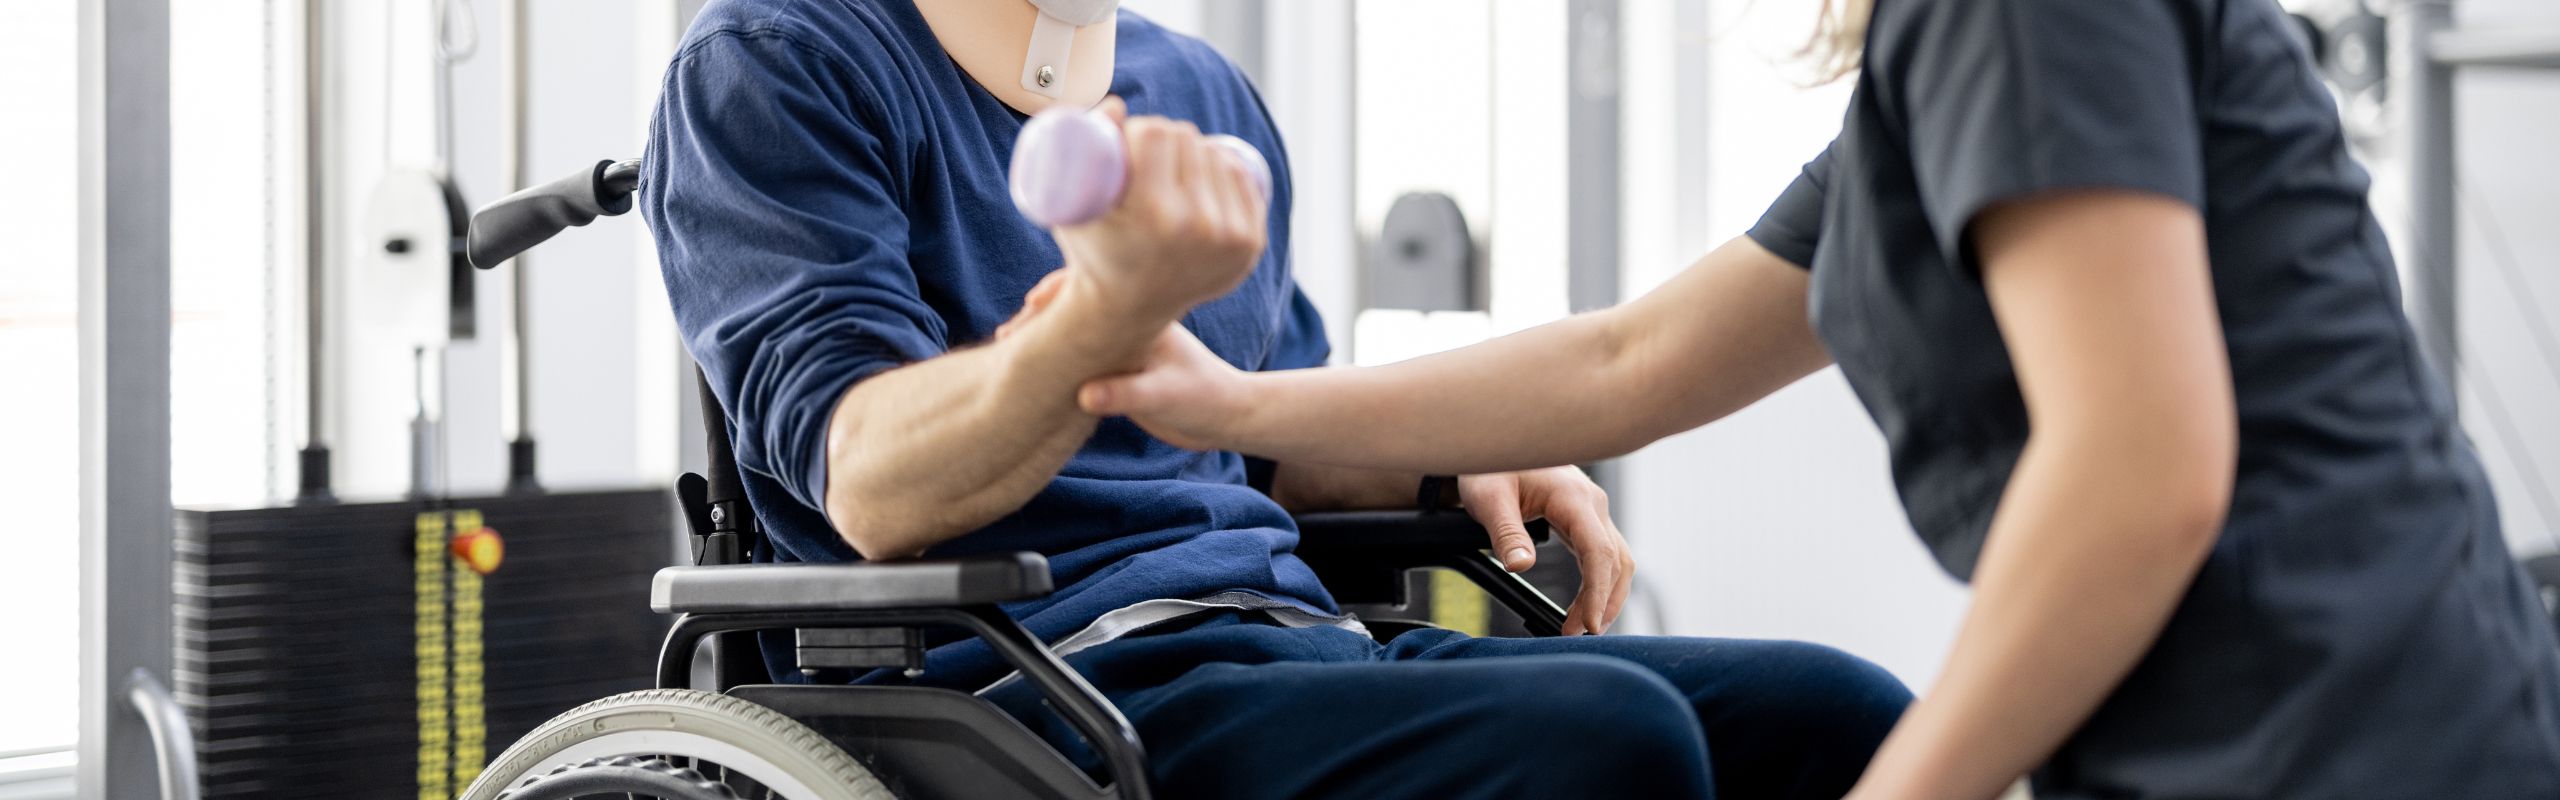 person in wheelchair engaging in physical therapy